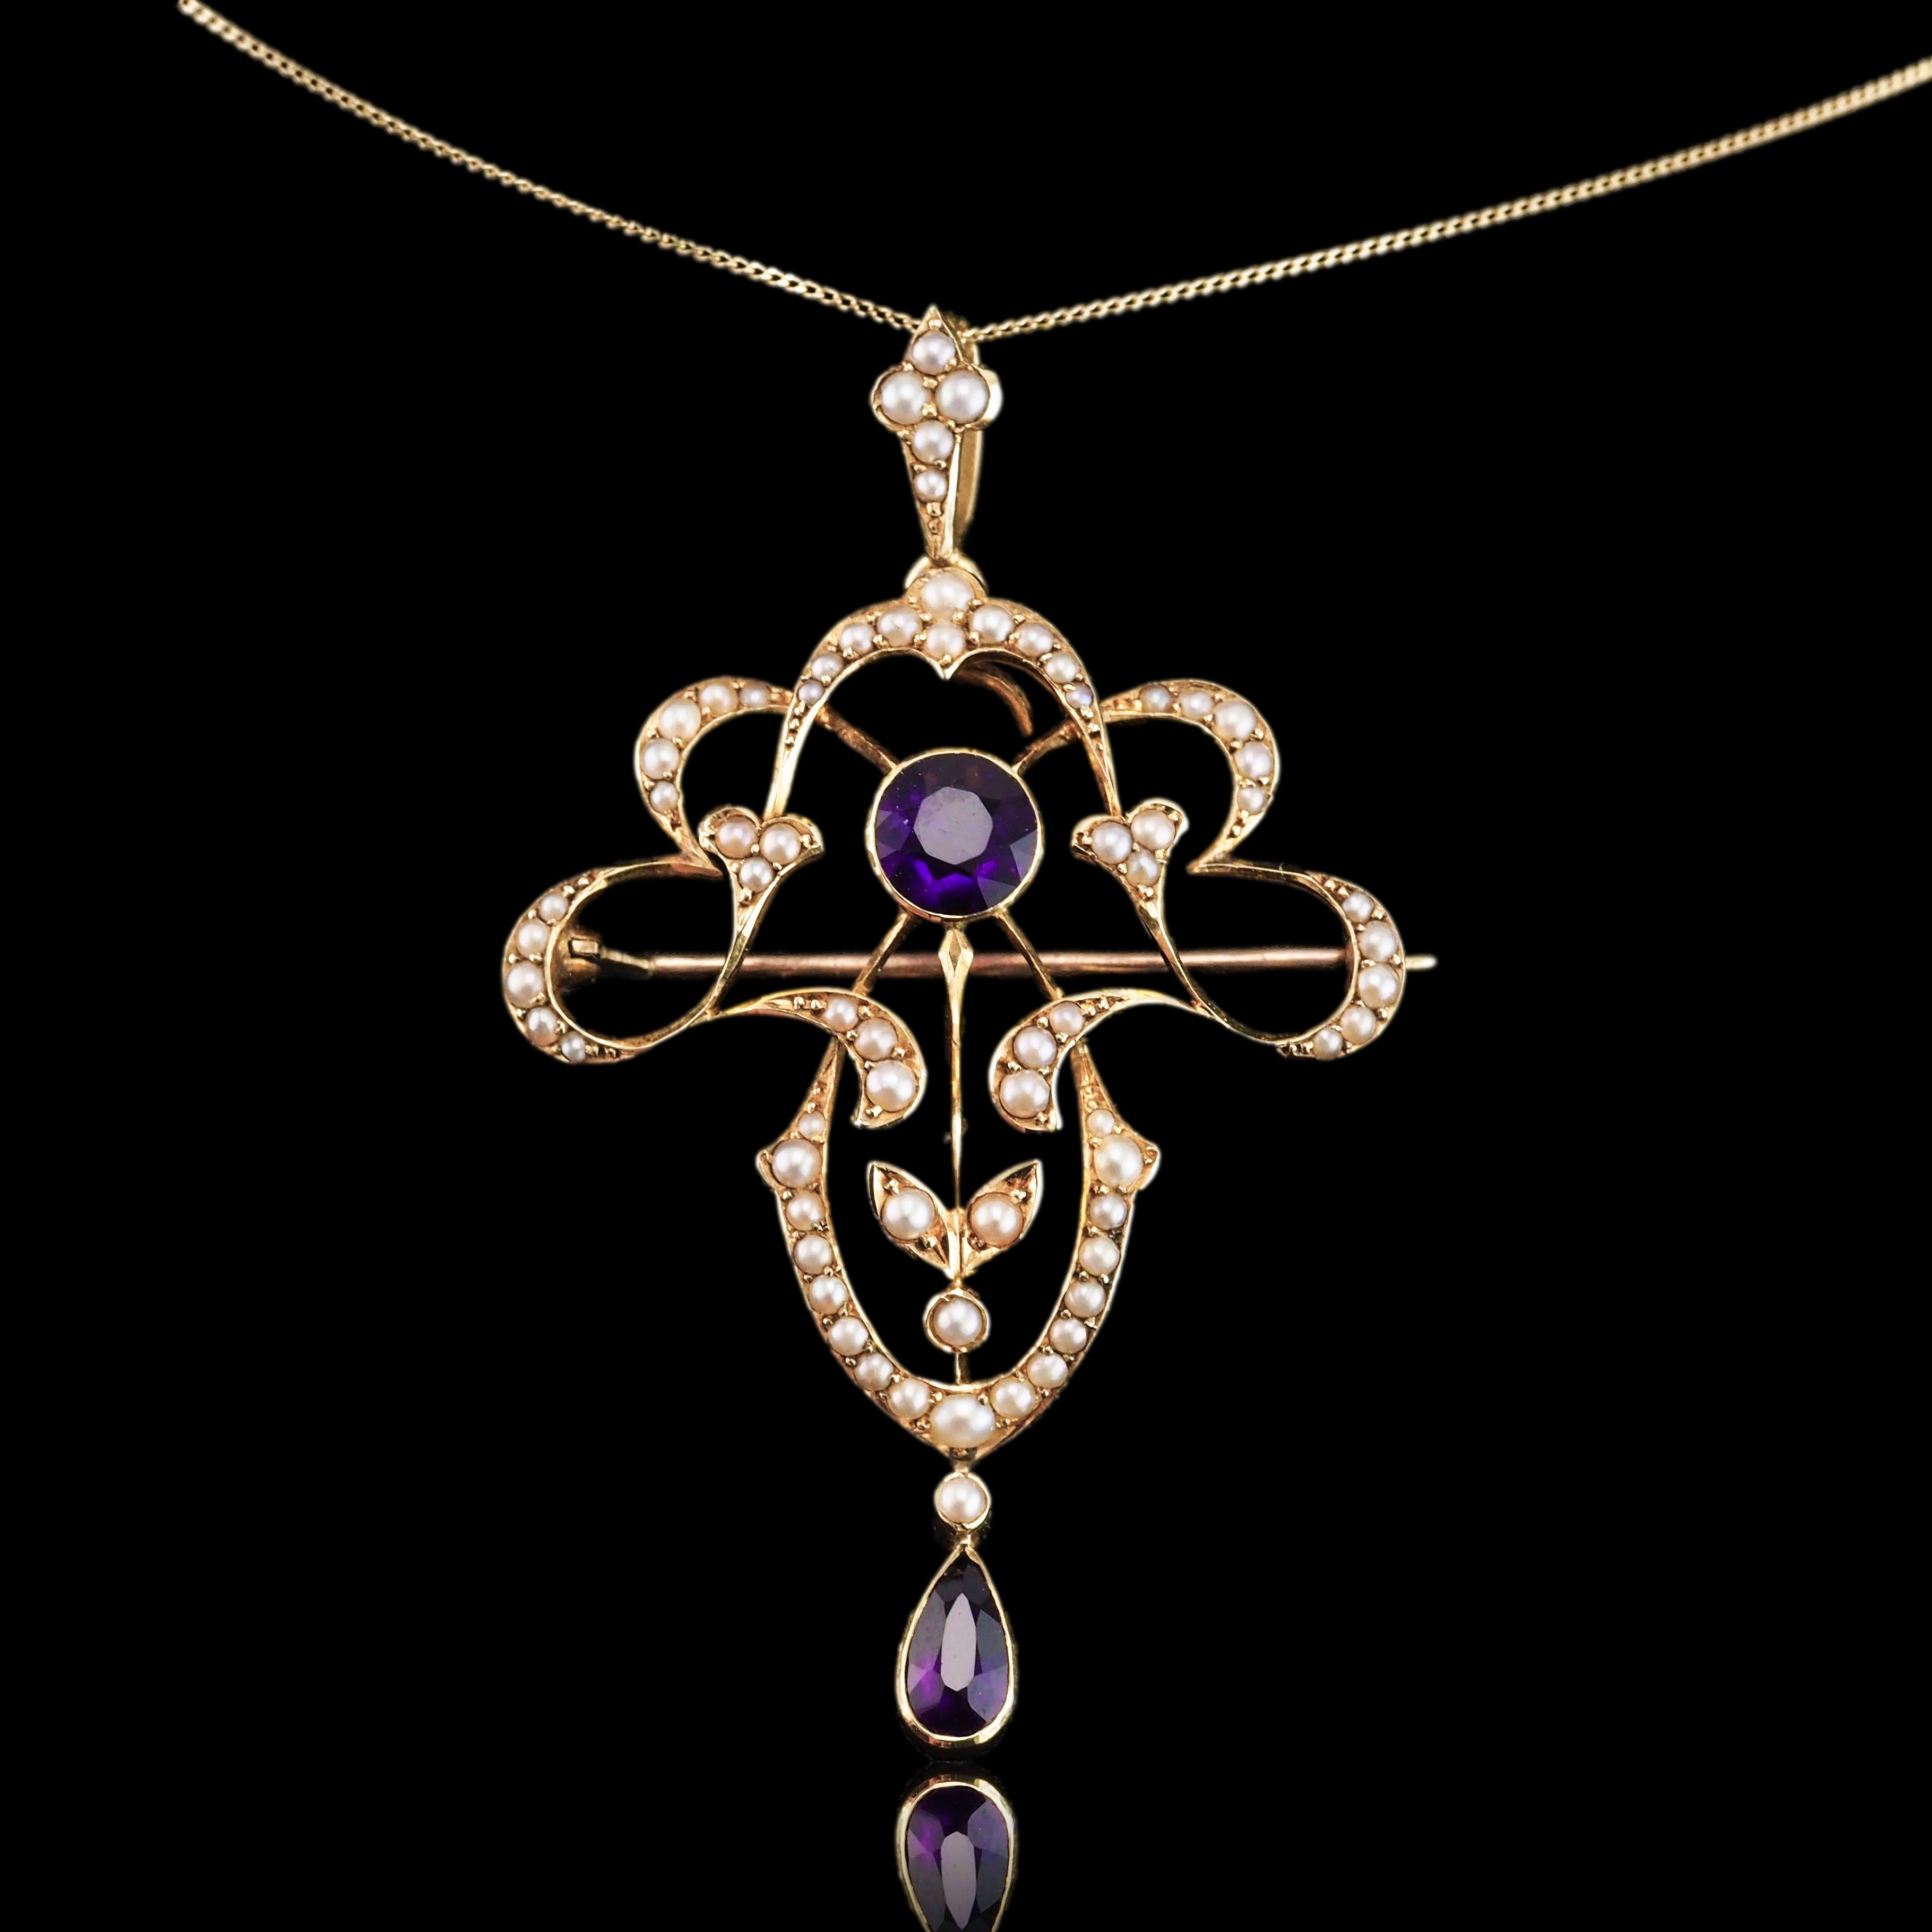 Antique Edwardian Amethyst & Seed Pearl 15K Gold Pendant Necklace Art Nouveau  In Good Condition For Sale In London, GB